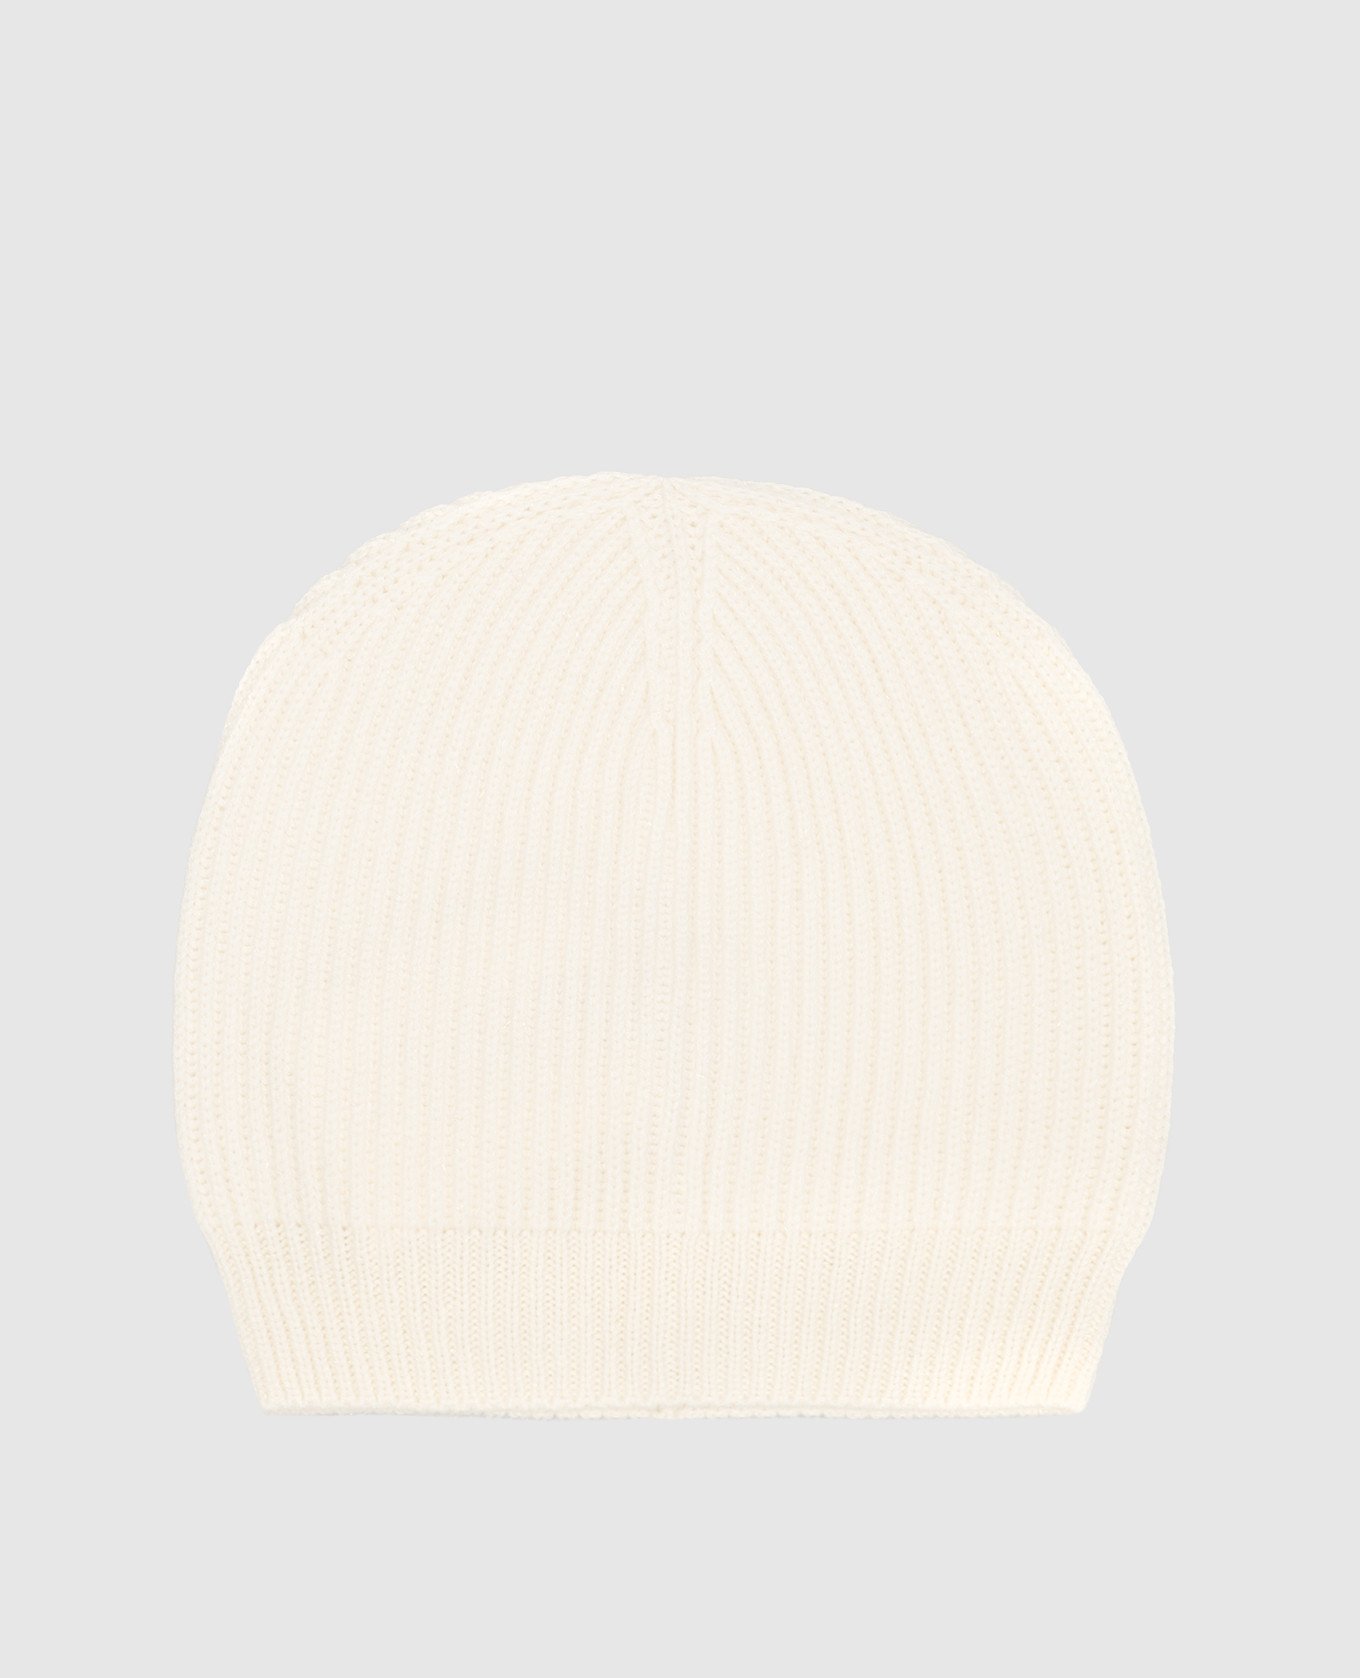 White cap made of wool, silk and cashmere with lurex